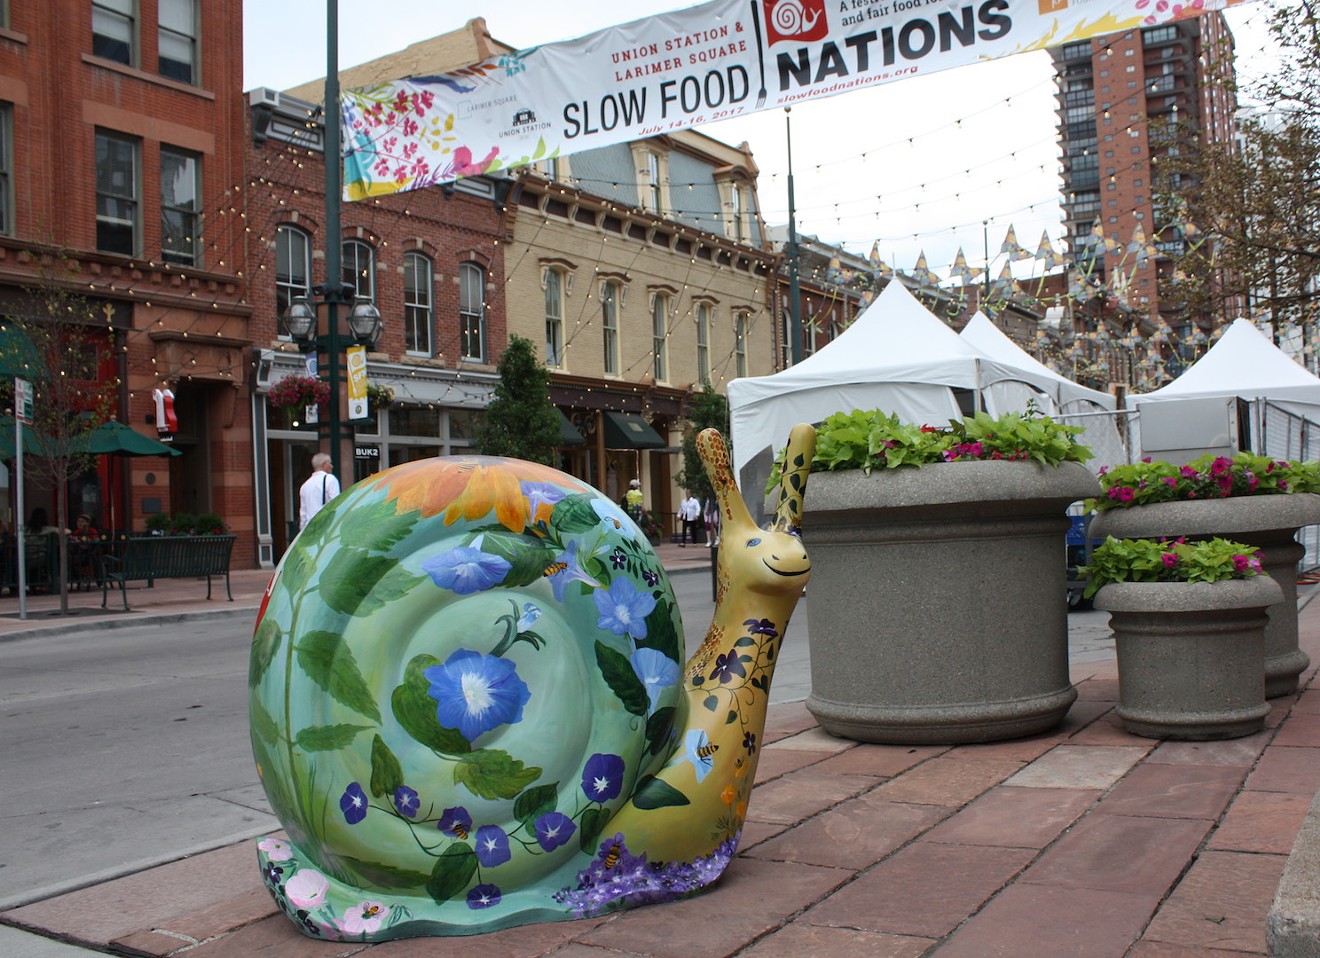 Adopt a snail's pace at Slow Food Nations.